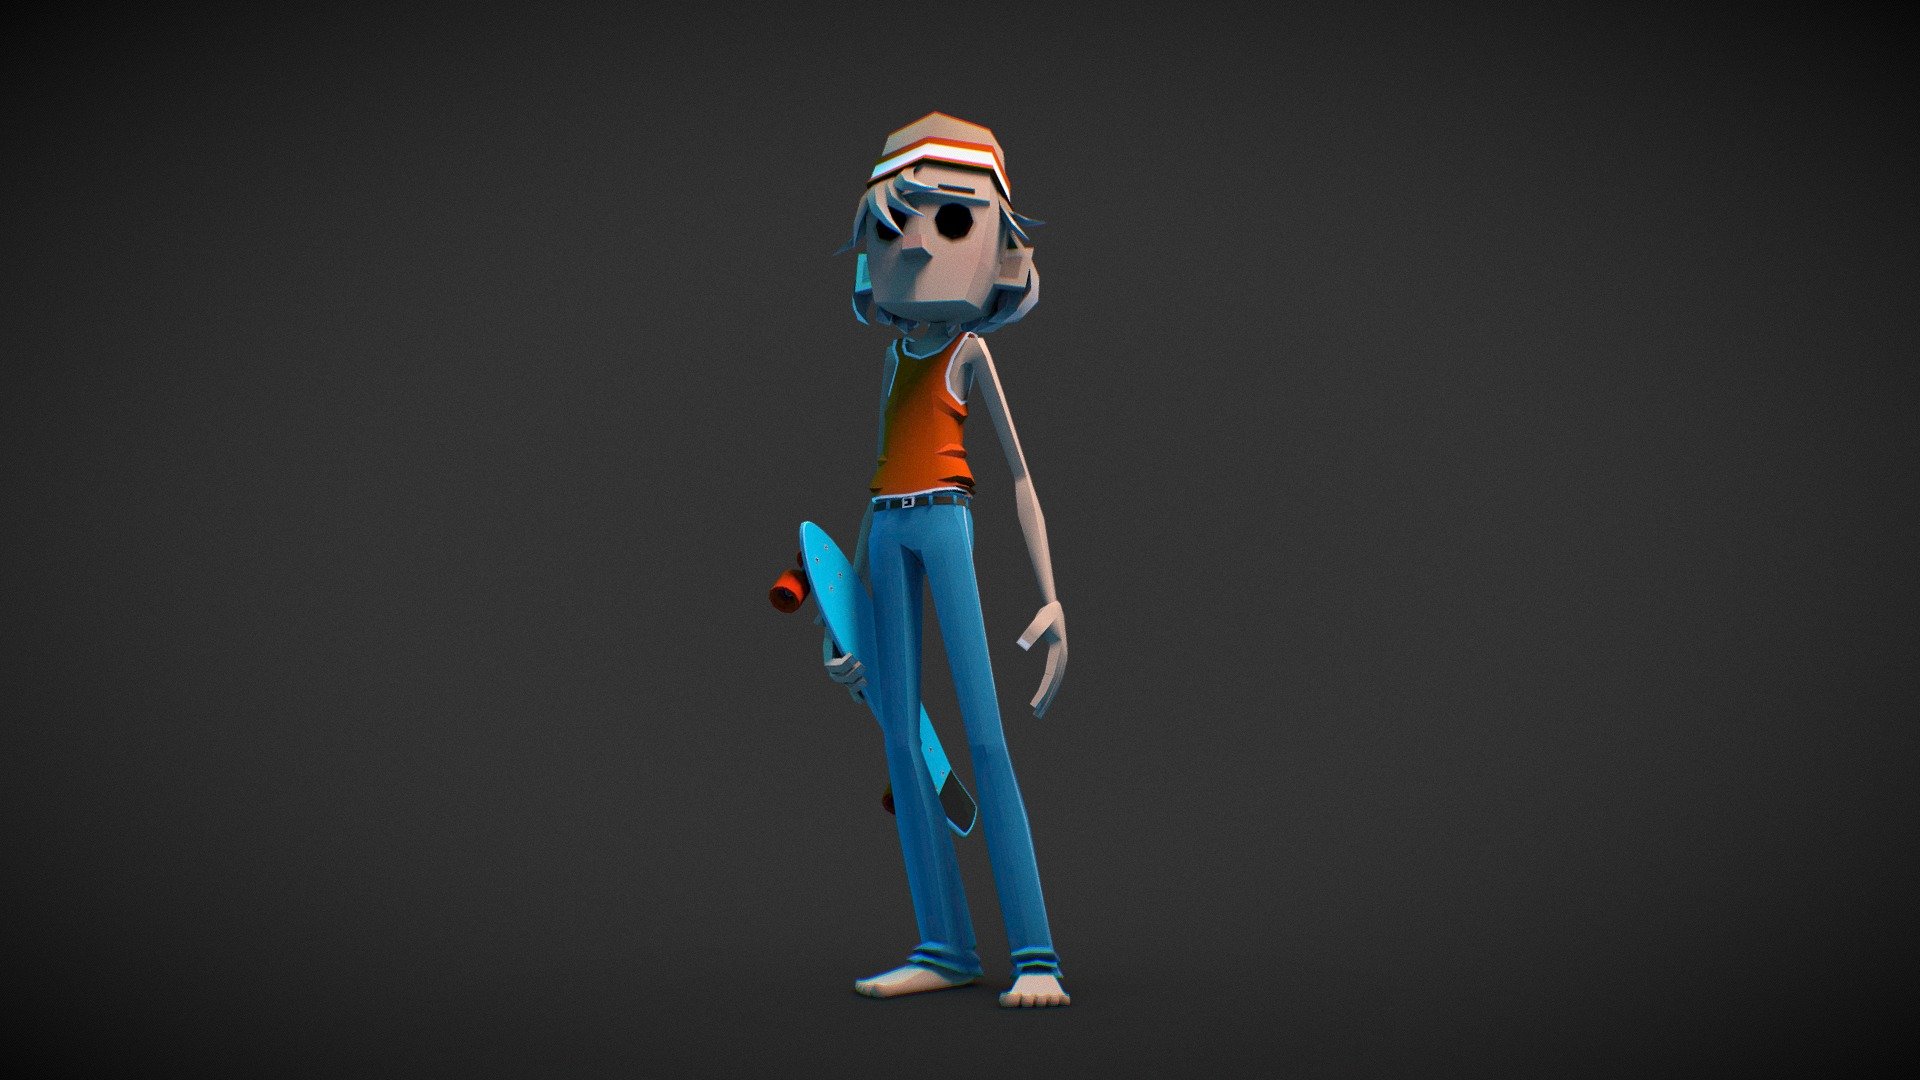 This is one of the characters in development for Pocket Skate

Thanks, for checking it out!
- Pete - 70's Skater - Pocket Skate - 3D model by Pocket Skate! (@PocketSkate) 3d model